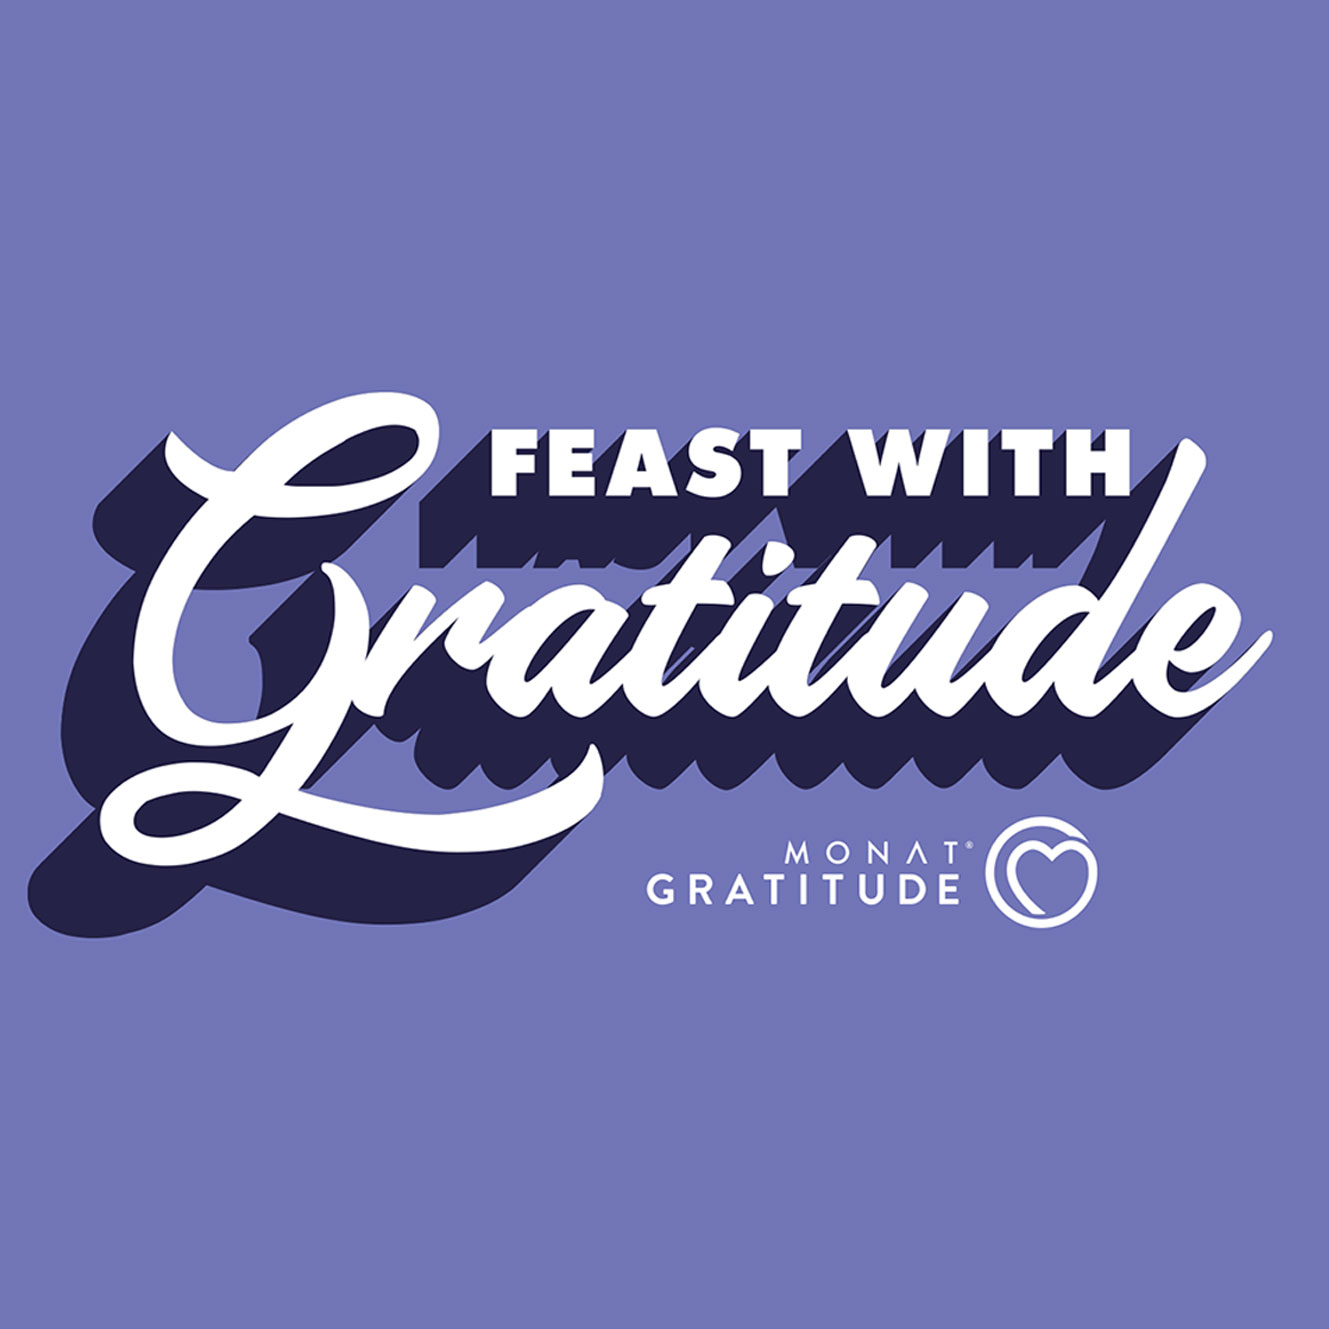 Feast with Gratitude - A Free Food Distribution